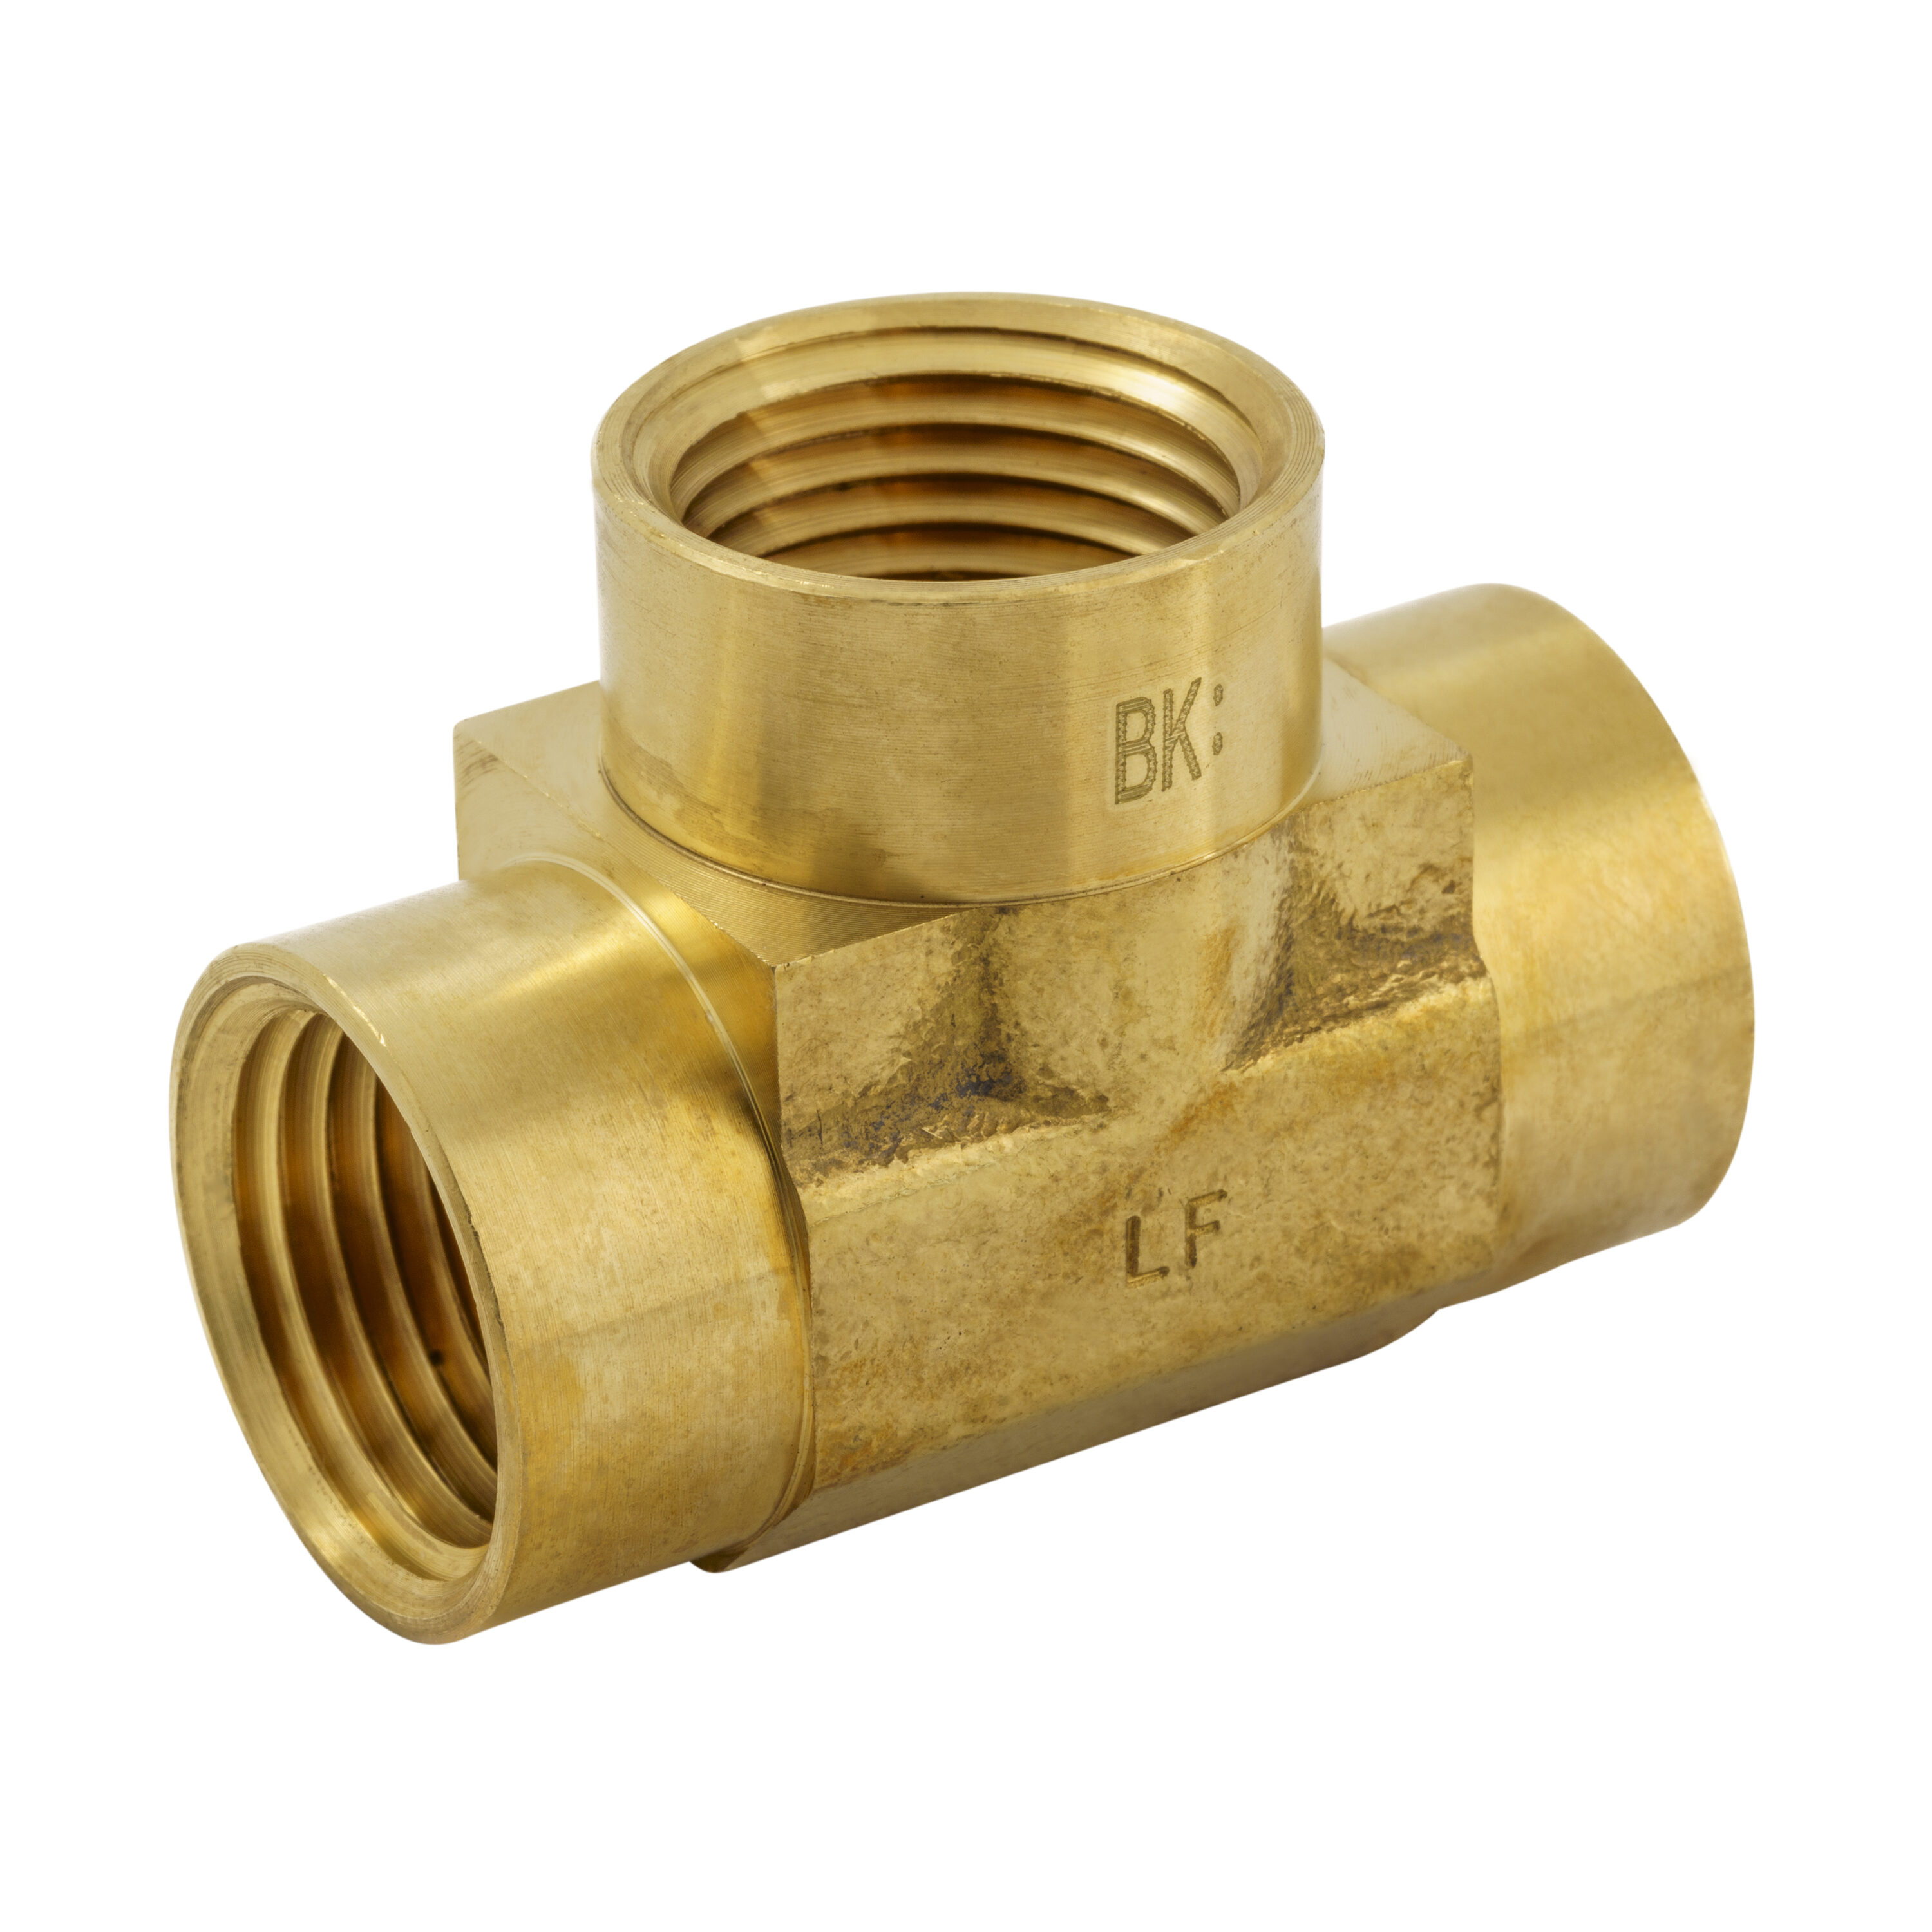 Pipe Fitting Buying Guide